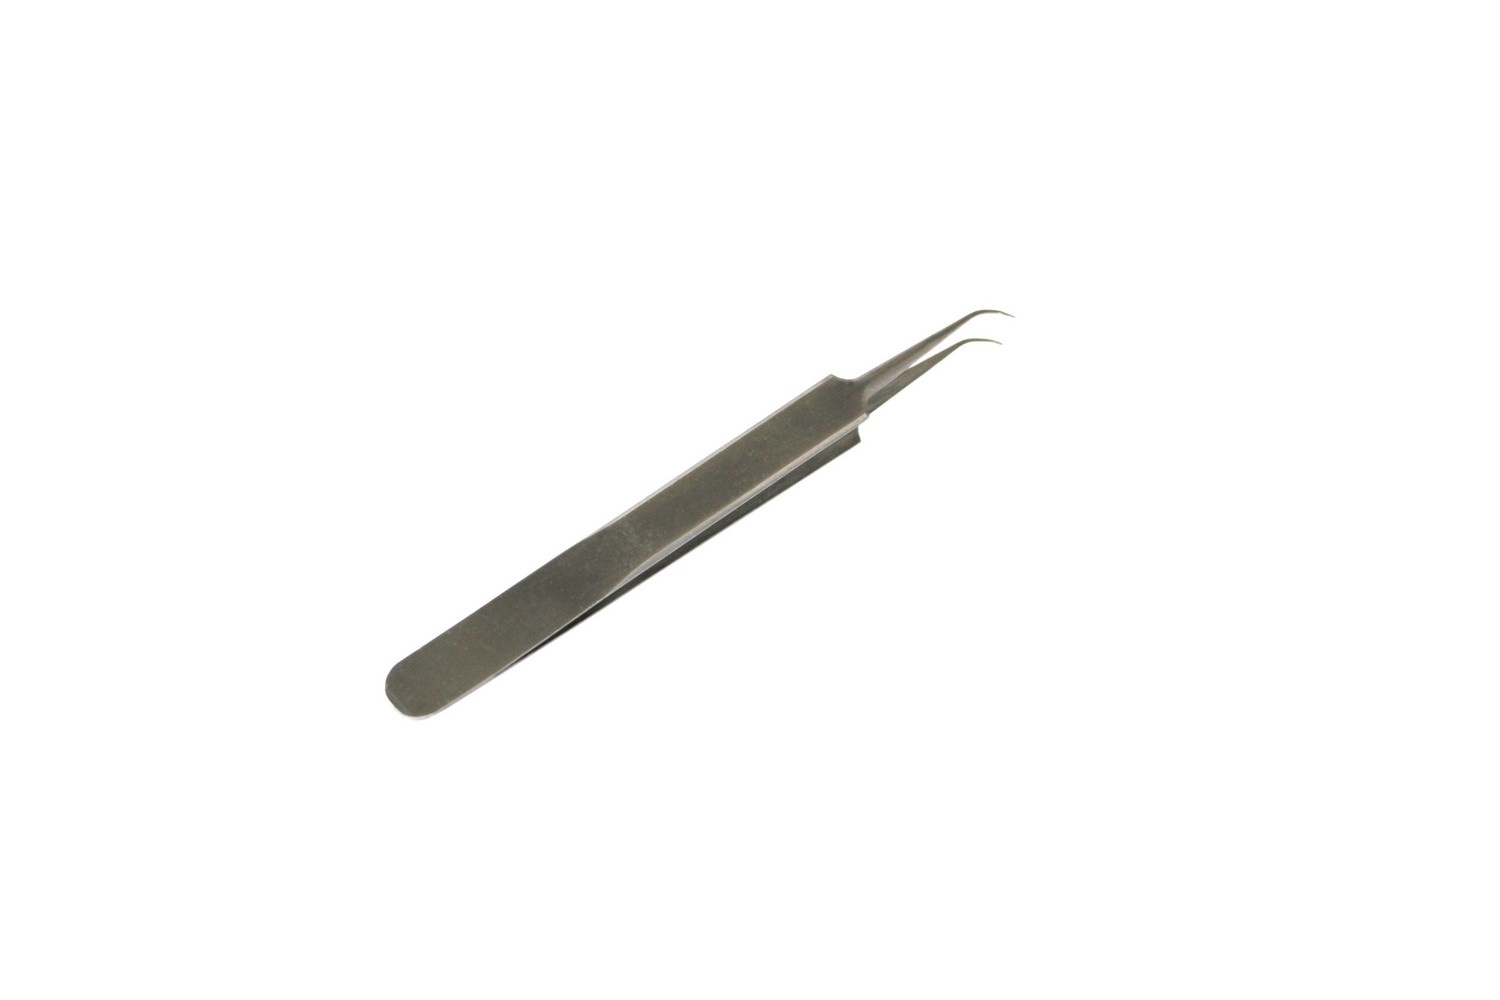 MakerBeamXS - 5mmx5mm 1 curved point tweezer for MakerBeamXS